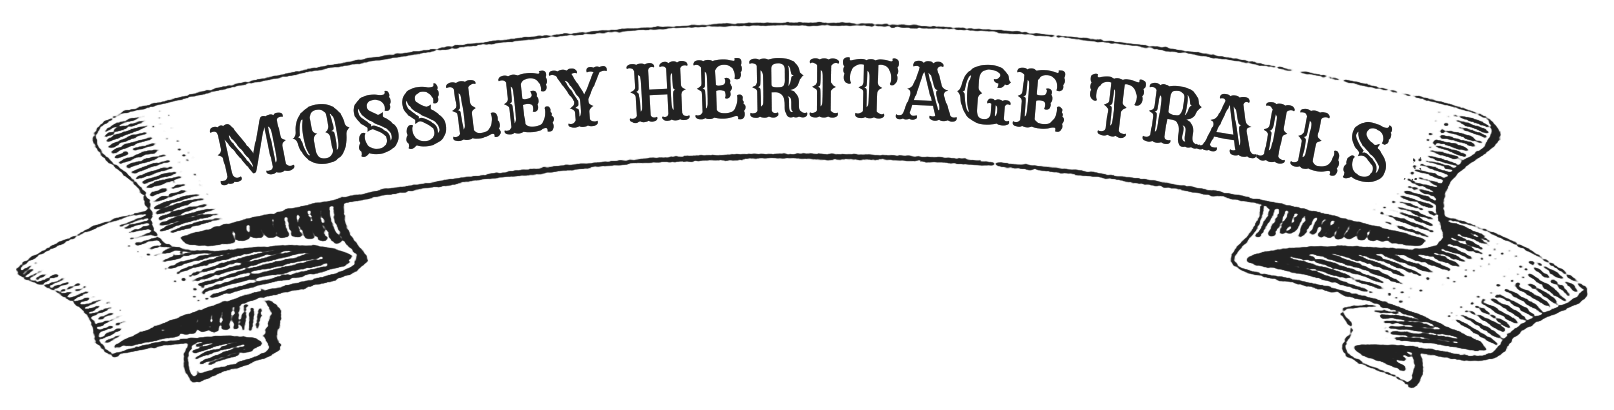 Mossley Heritage Trails